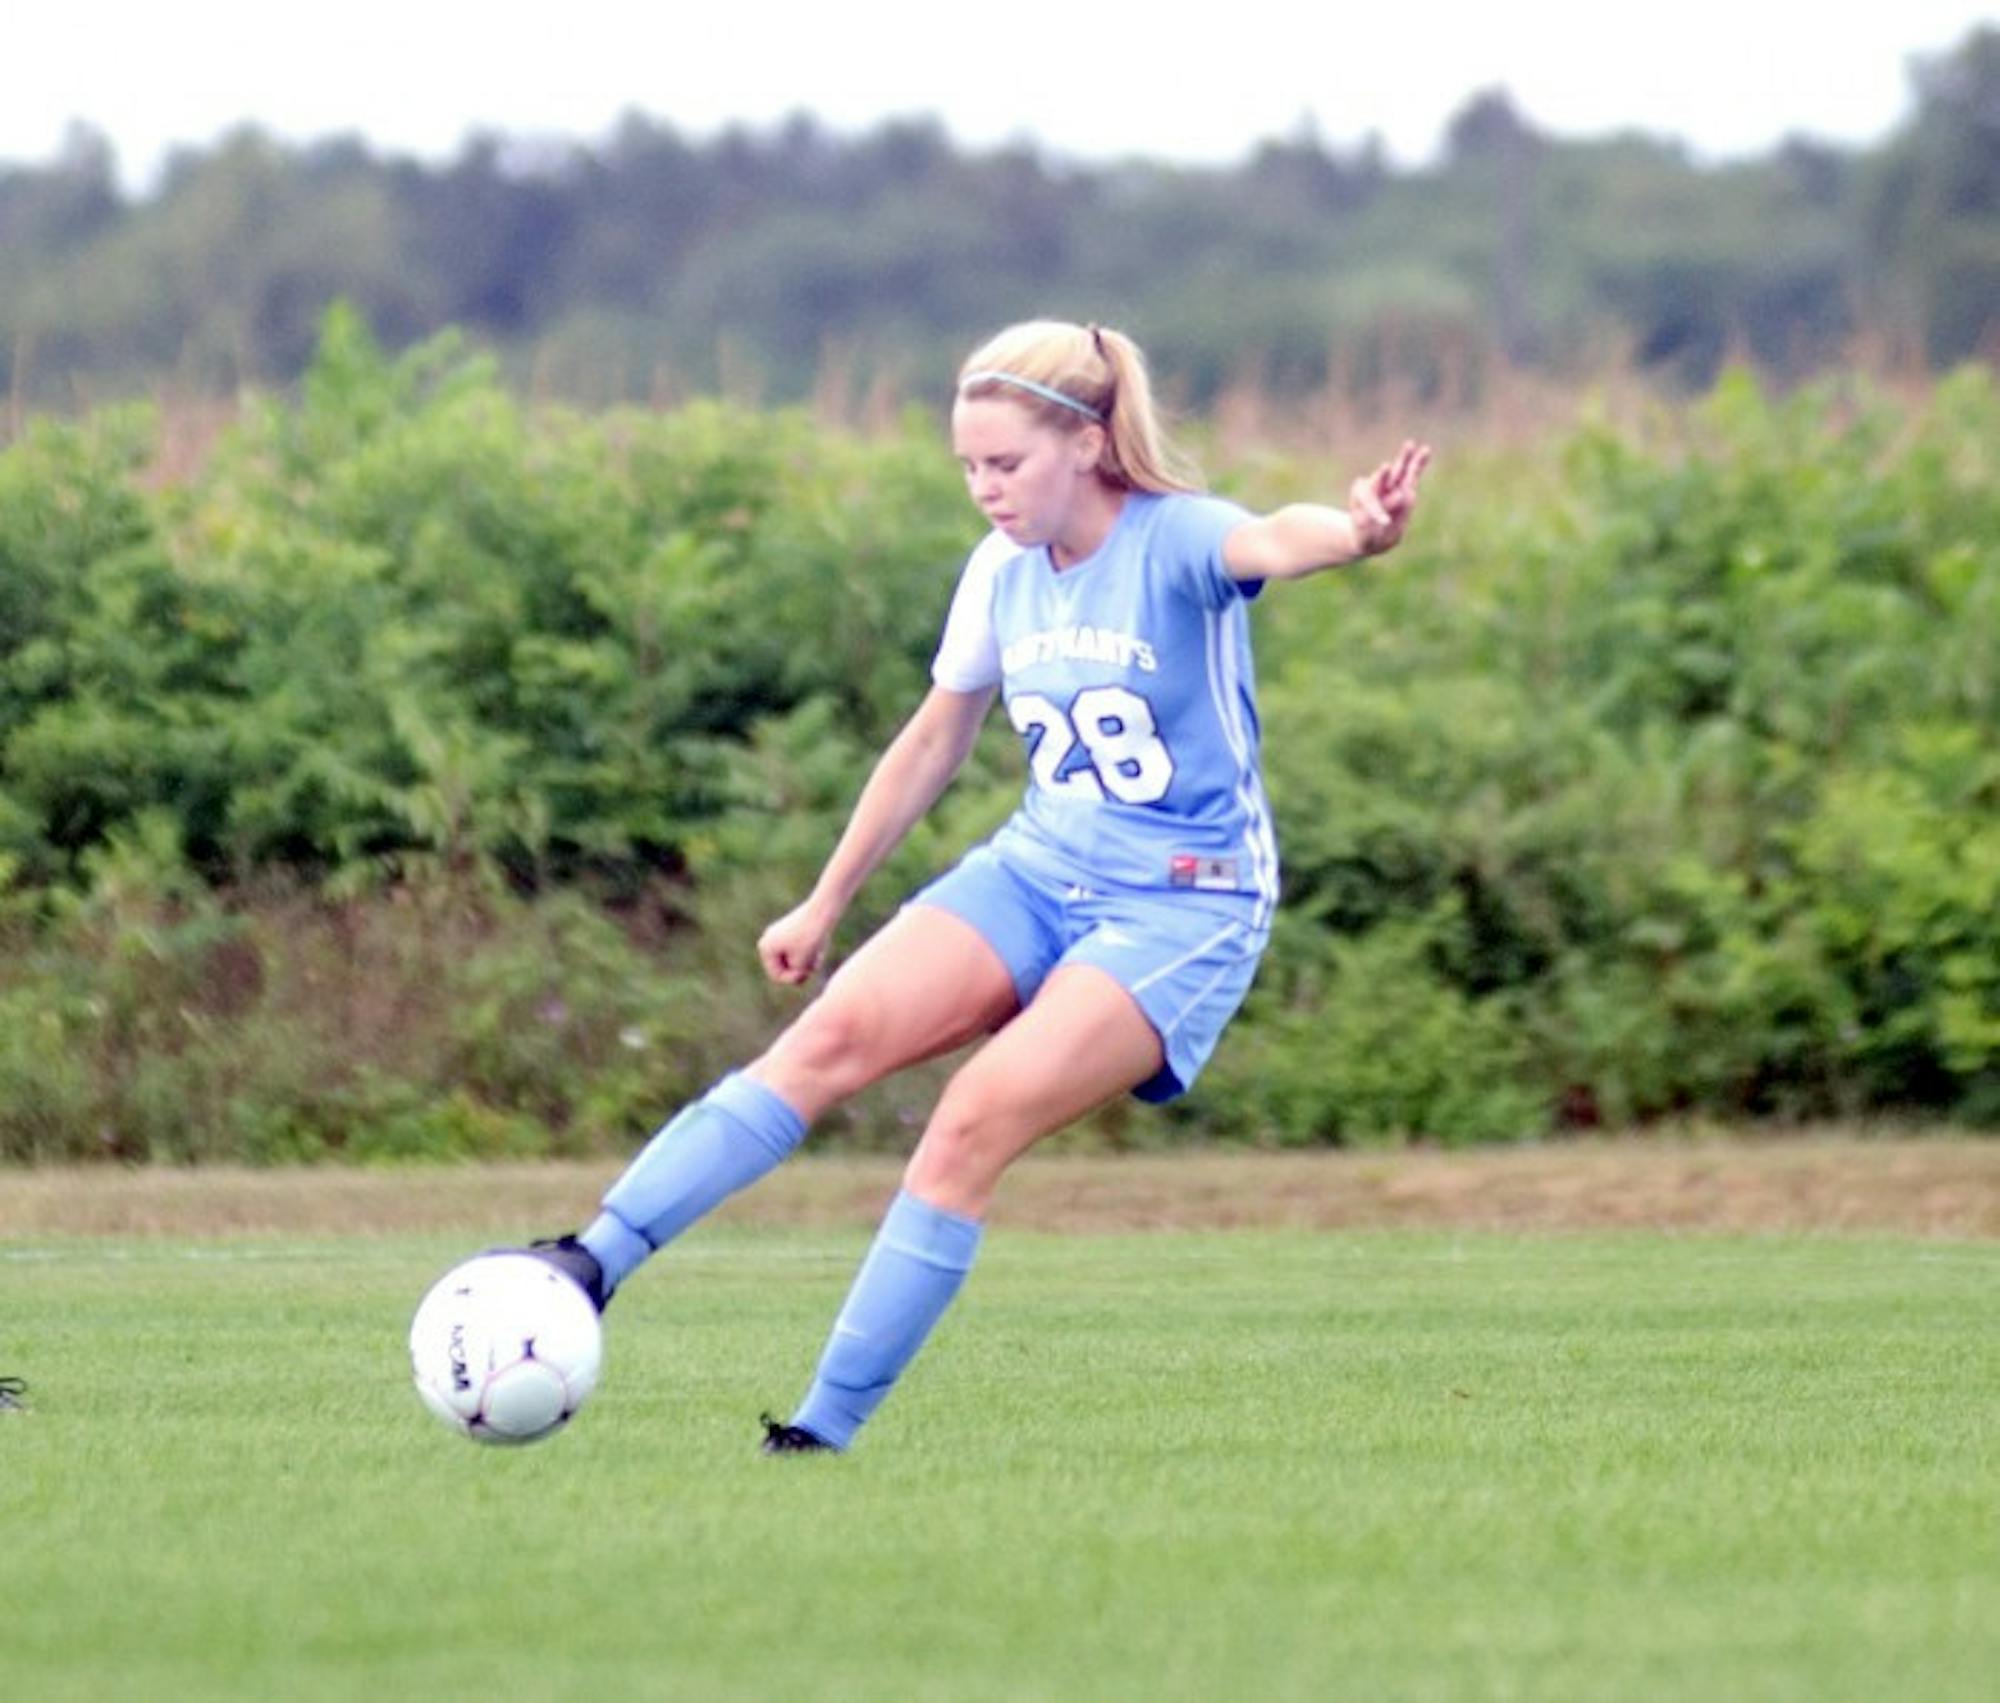 Belles sophomore midfielder Kathryn Lueking connects with the ball during Saint Mary’s 4-1 victory against Illinois Tech on Sept. 2. Lueking started all 20 games for the Belles in 2013.